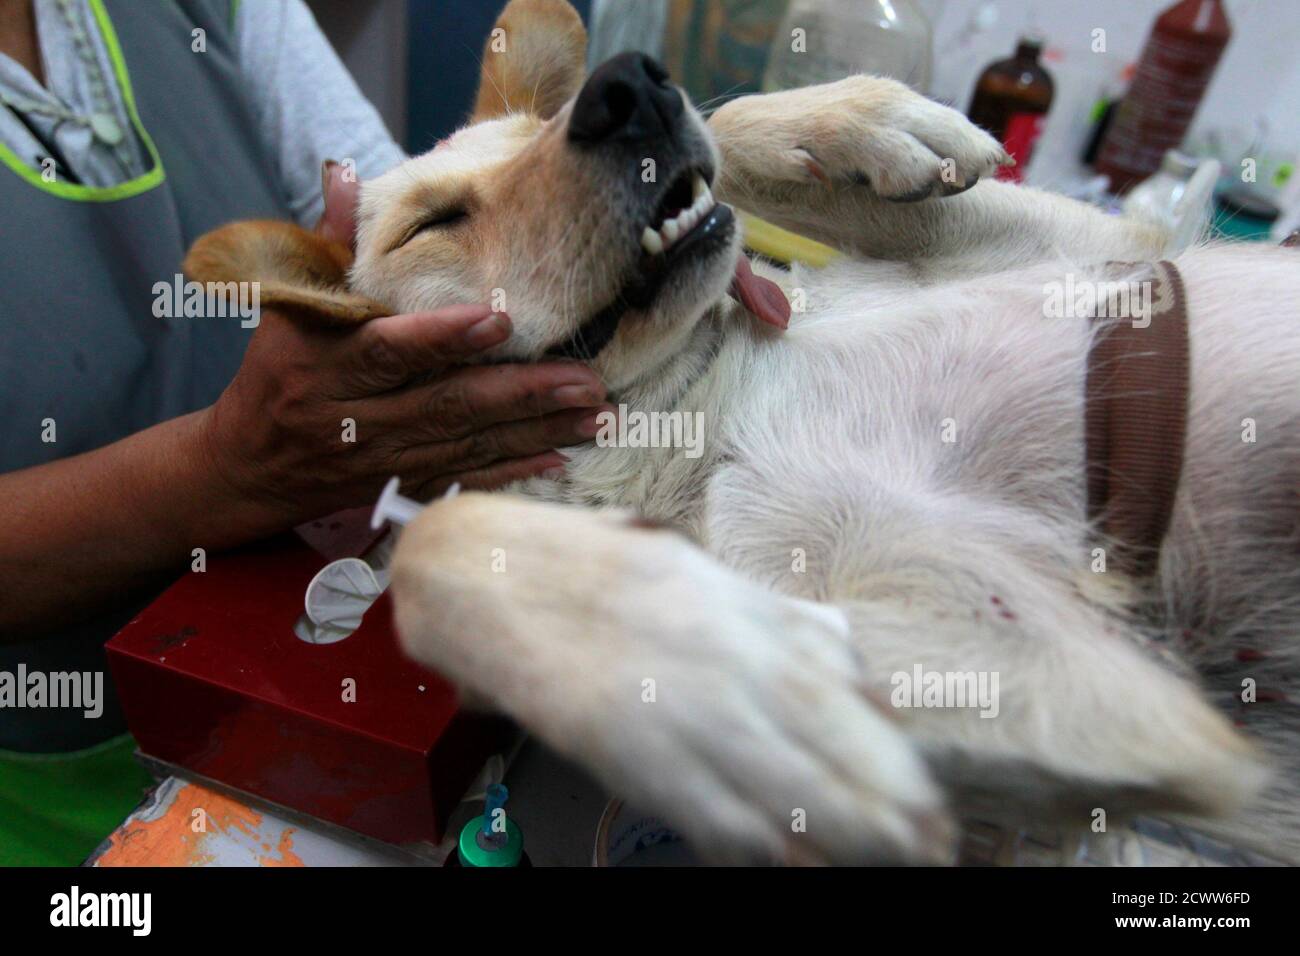 A female dog is prepared for a sterilization surgery at Oasis, a veterinary  clinic, in Lima's shanty town of Villa El Salvador December 28, 2012.  Veterinarians and animal activists in Villa El